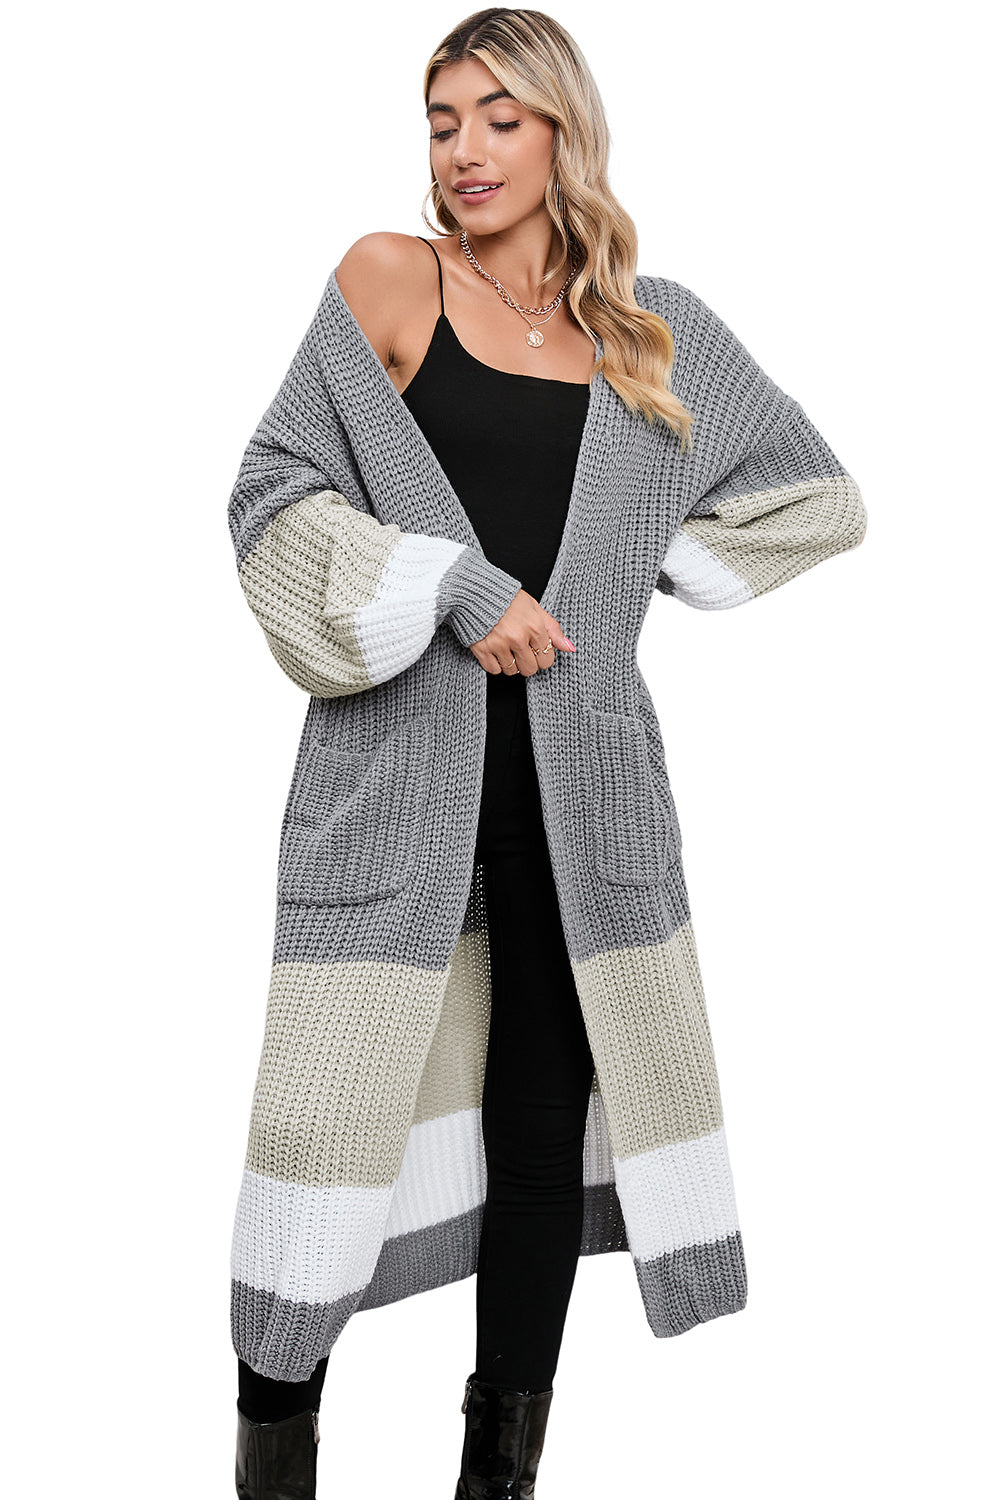 LC2711008-11-S, LC2711008-11-M, LC2711008-11-L, LC2711008-11-XL, Gray Colorblock Cable Knit Side Pockets Duster Cardigan